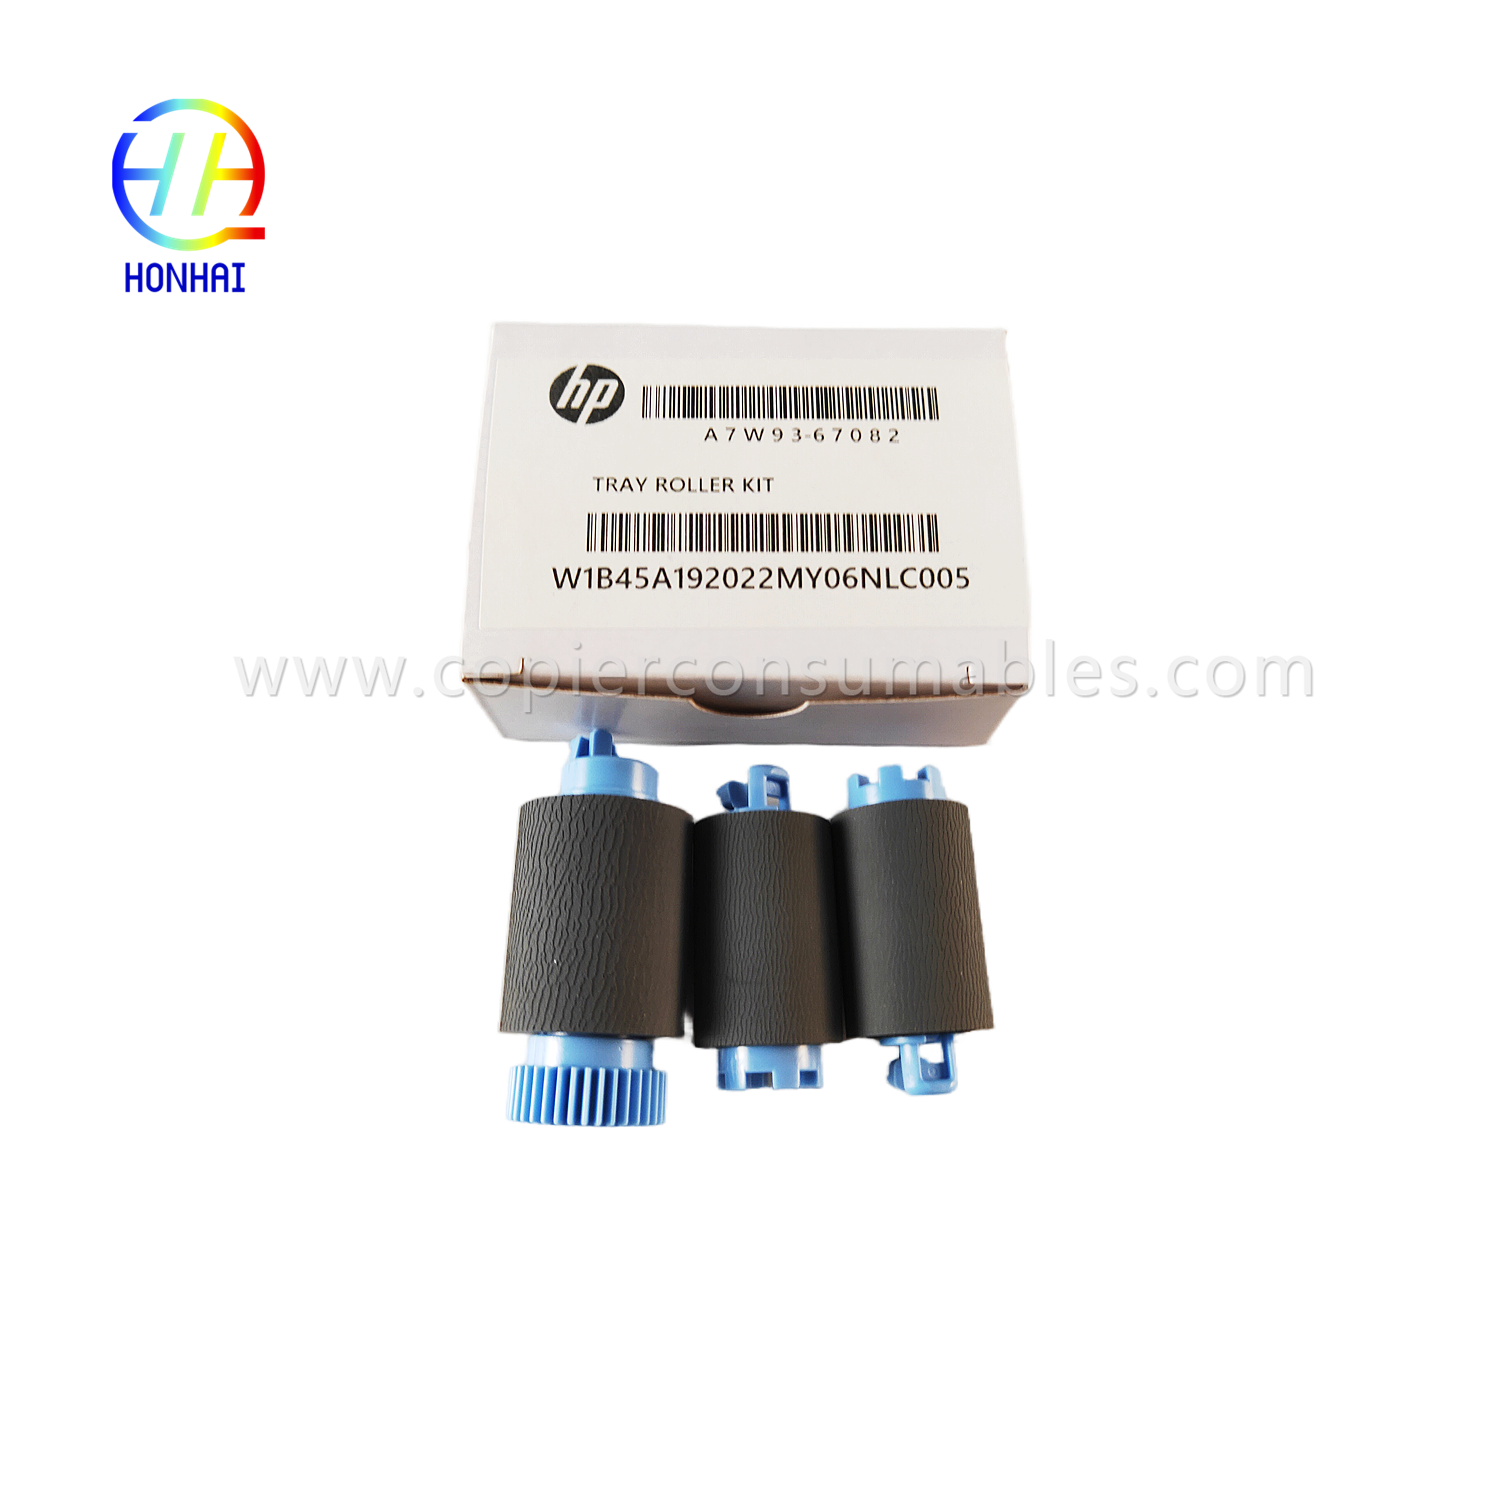 https://www.copierconsumables.com/tray-2-5-pickup-feed-separation-roller-set-for-hp-a7w93-67082-mfp-785f-780dn-e77650z-e77660z-e77650dn-e77650dn-e77660d p77750z-p77760z-p75050dn-p75050dw-produkto/